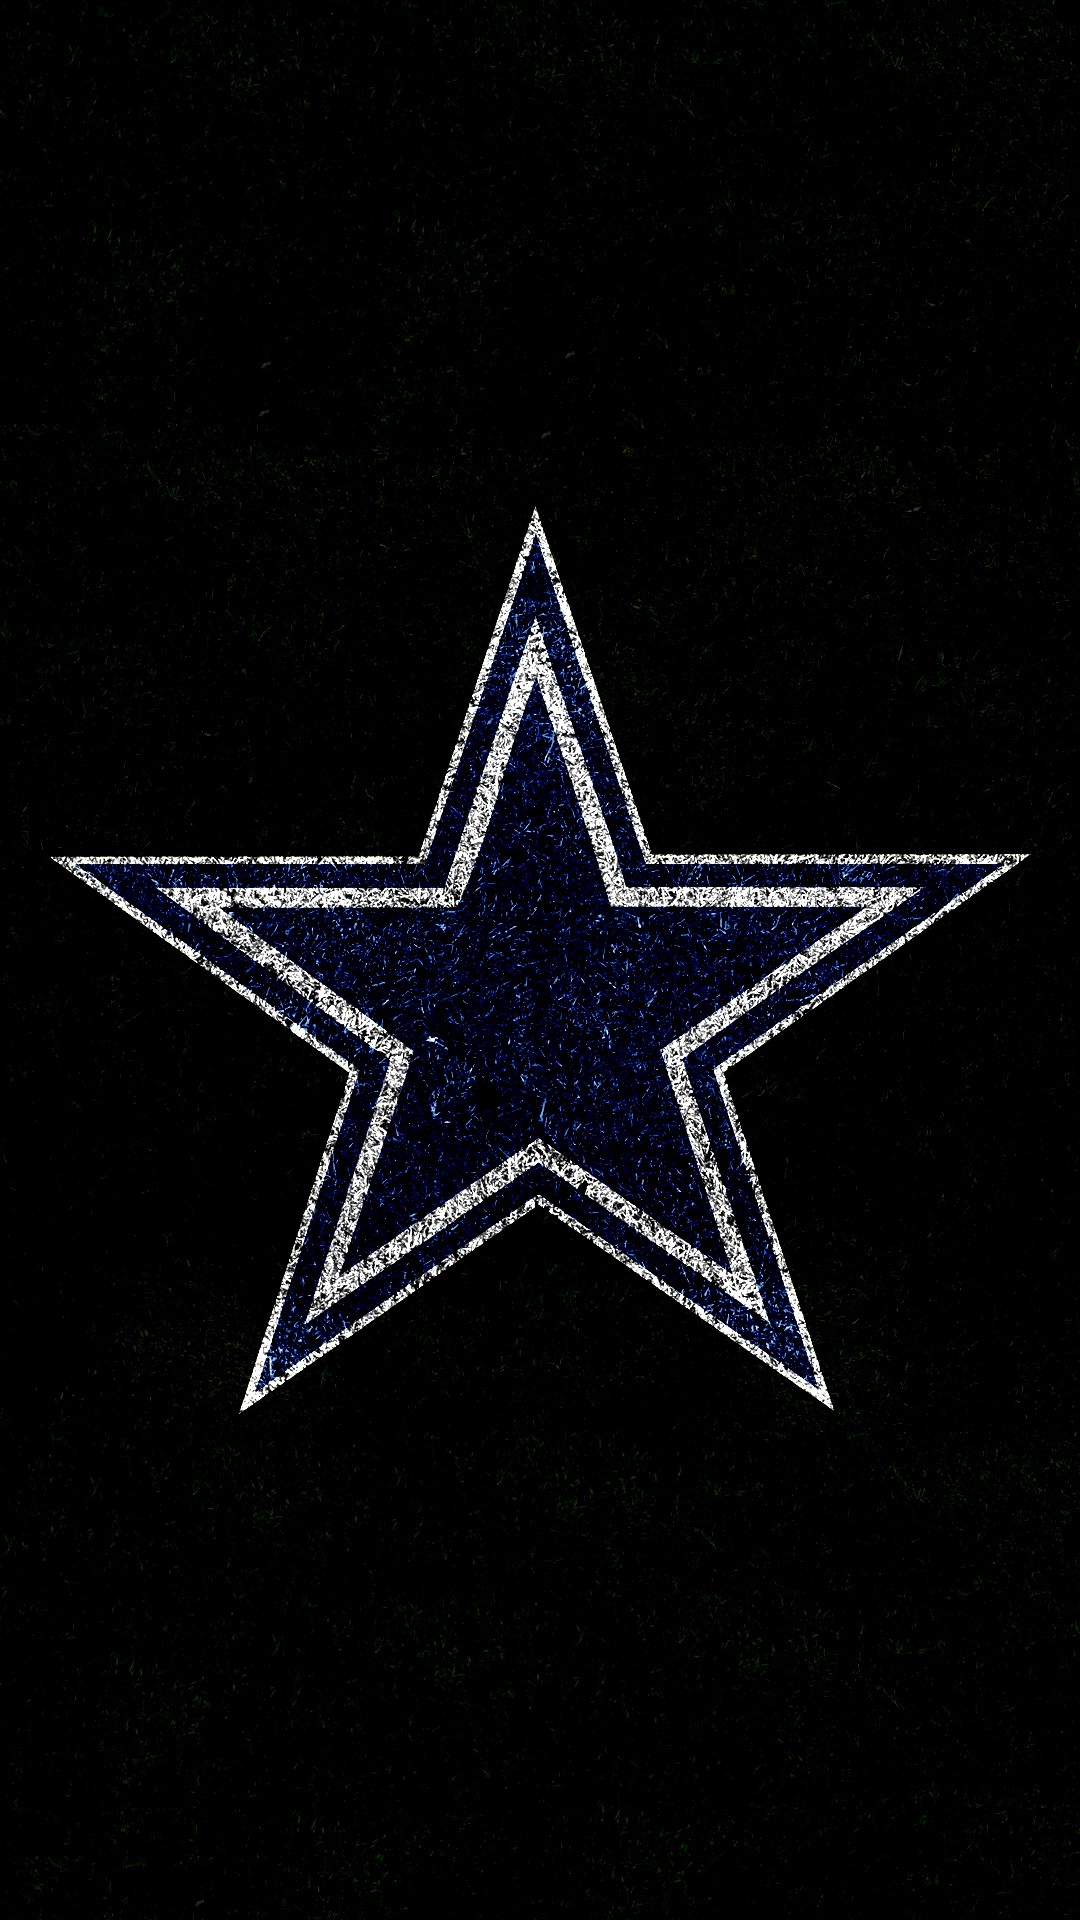 Dallas Cowboys Wallpaper For Android With high-resolution 1080X1920 pixel. You can use this wallpaper for your Android backgrounds, Tablet, Samsung Screensavers, Mobile Phone Lock Screen and another Smartphones device